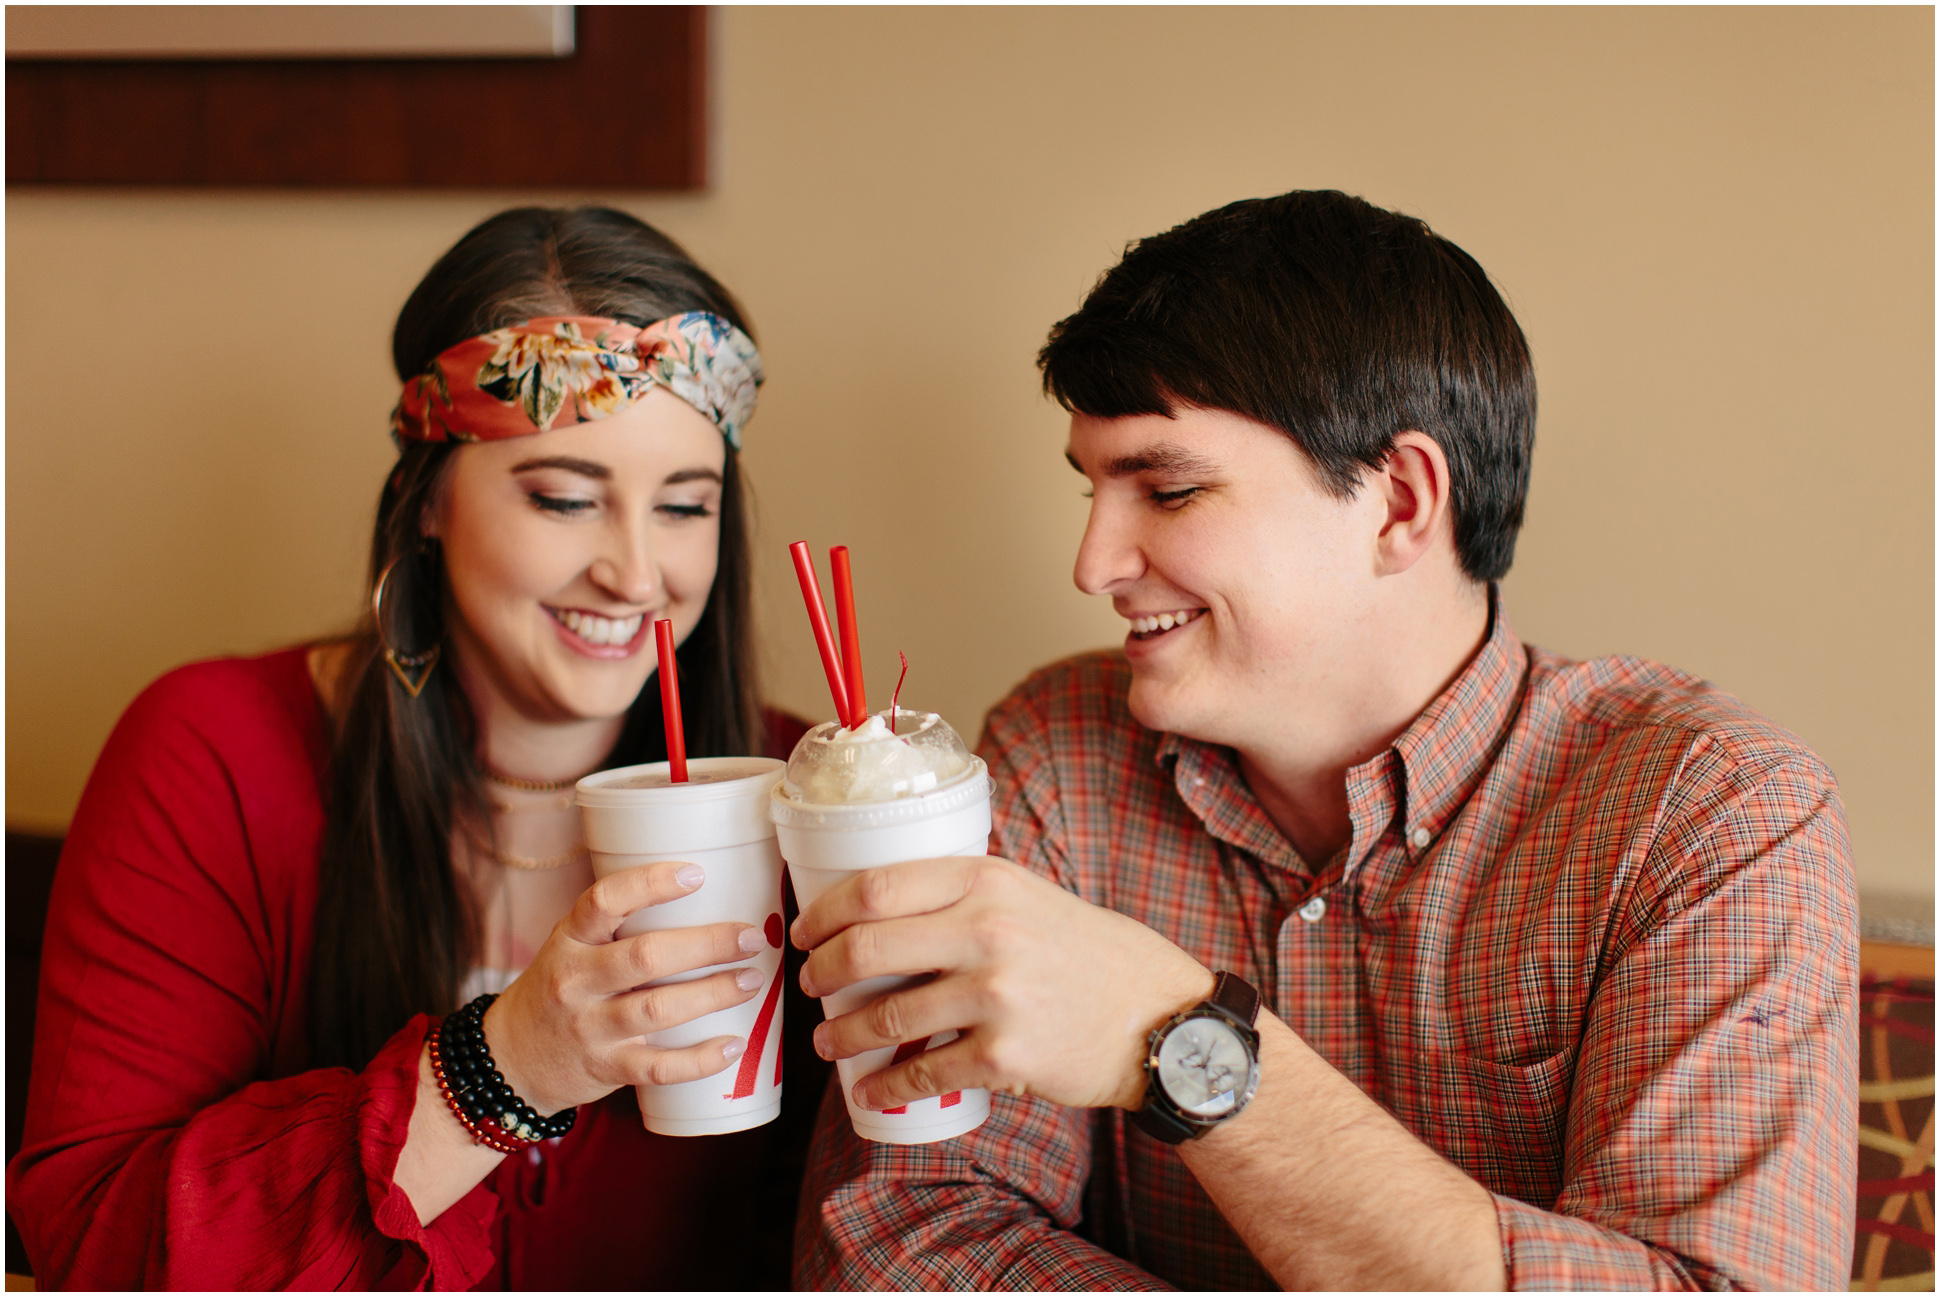 Chick-Fil-A Engagement Session | Two Chics Photography | www.twochicsphotography.com